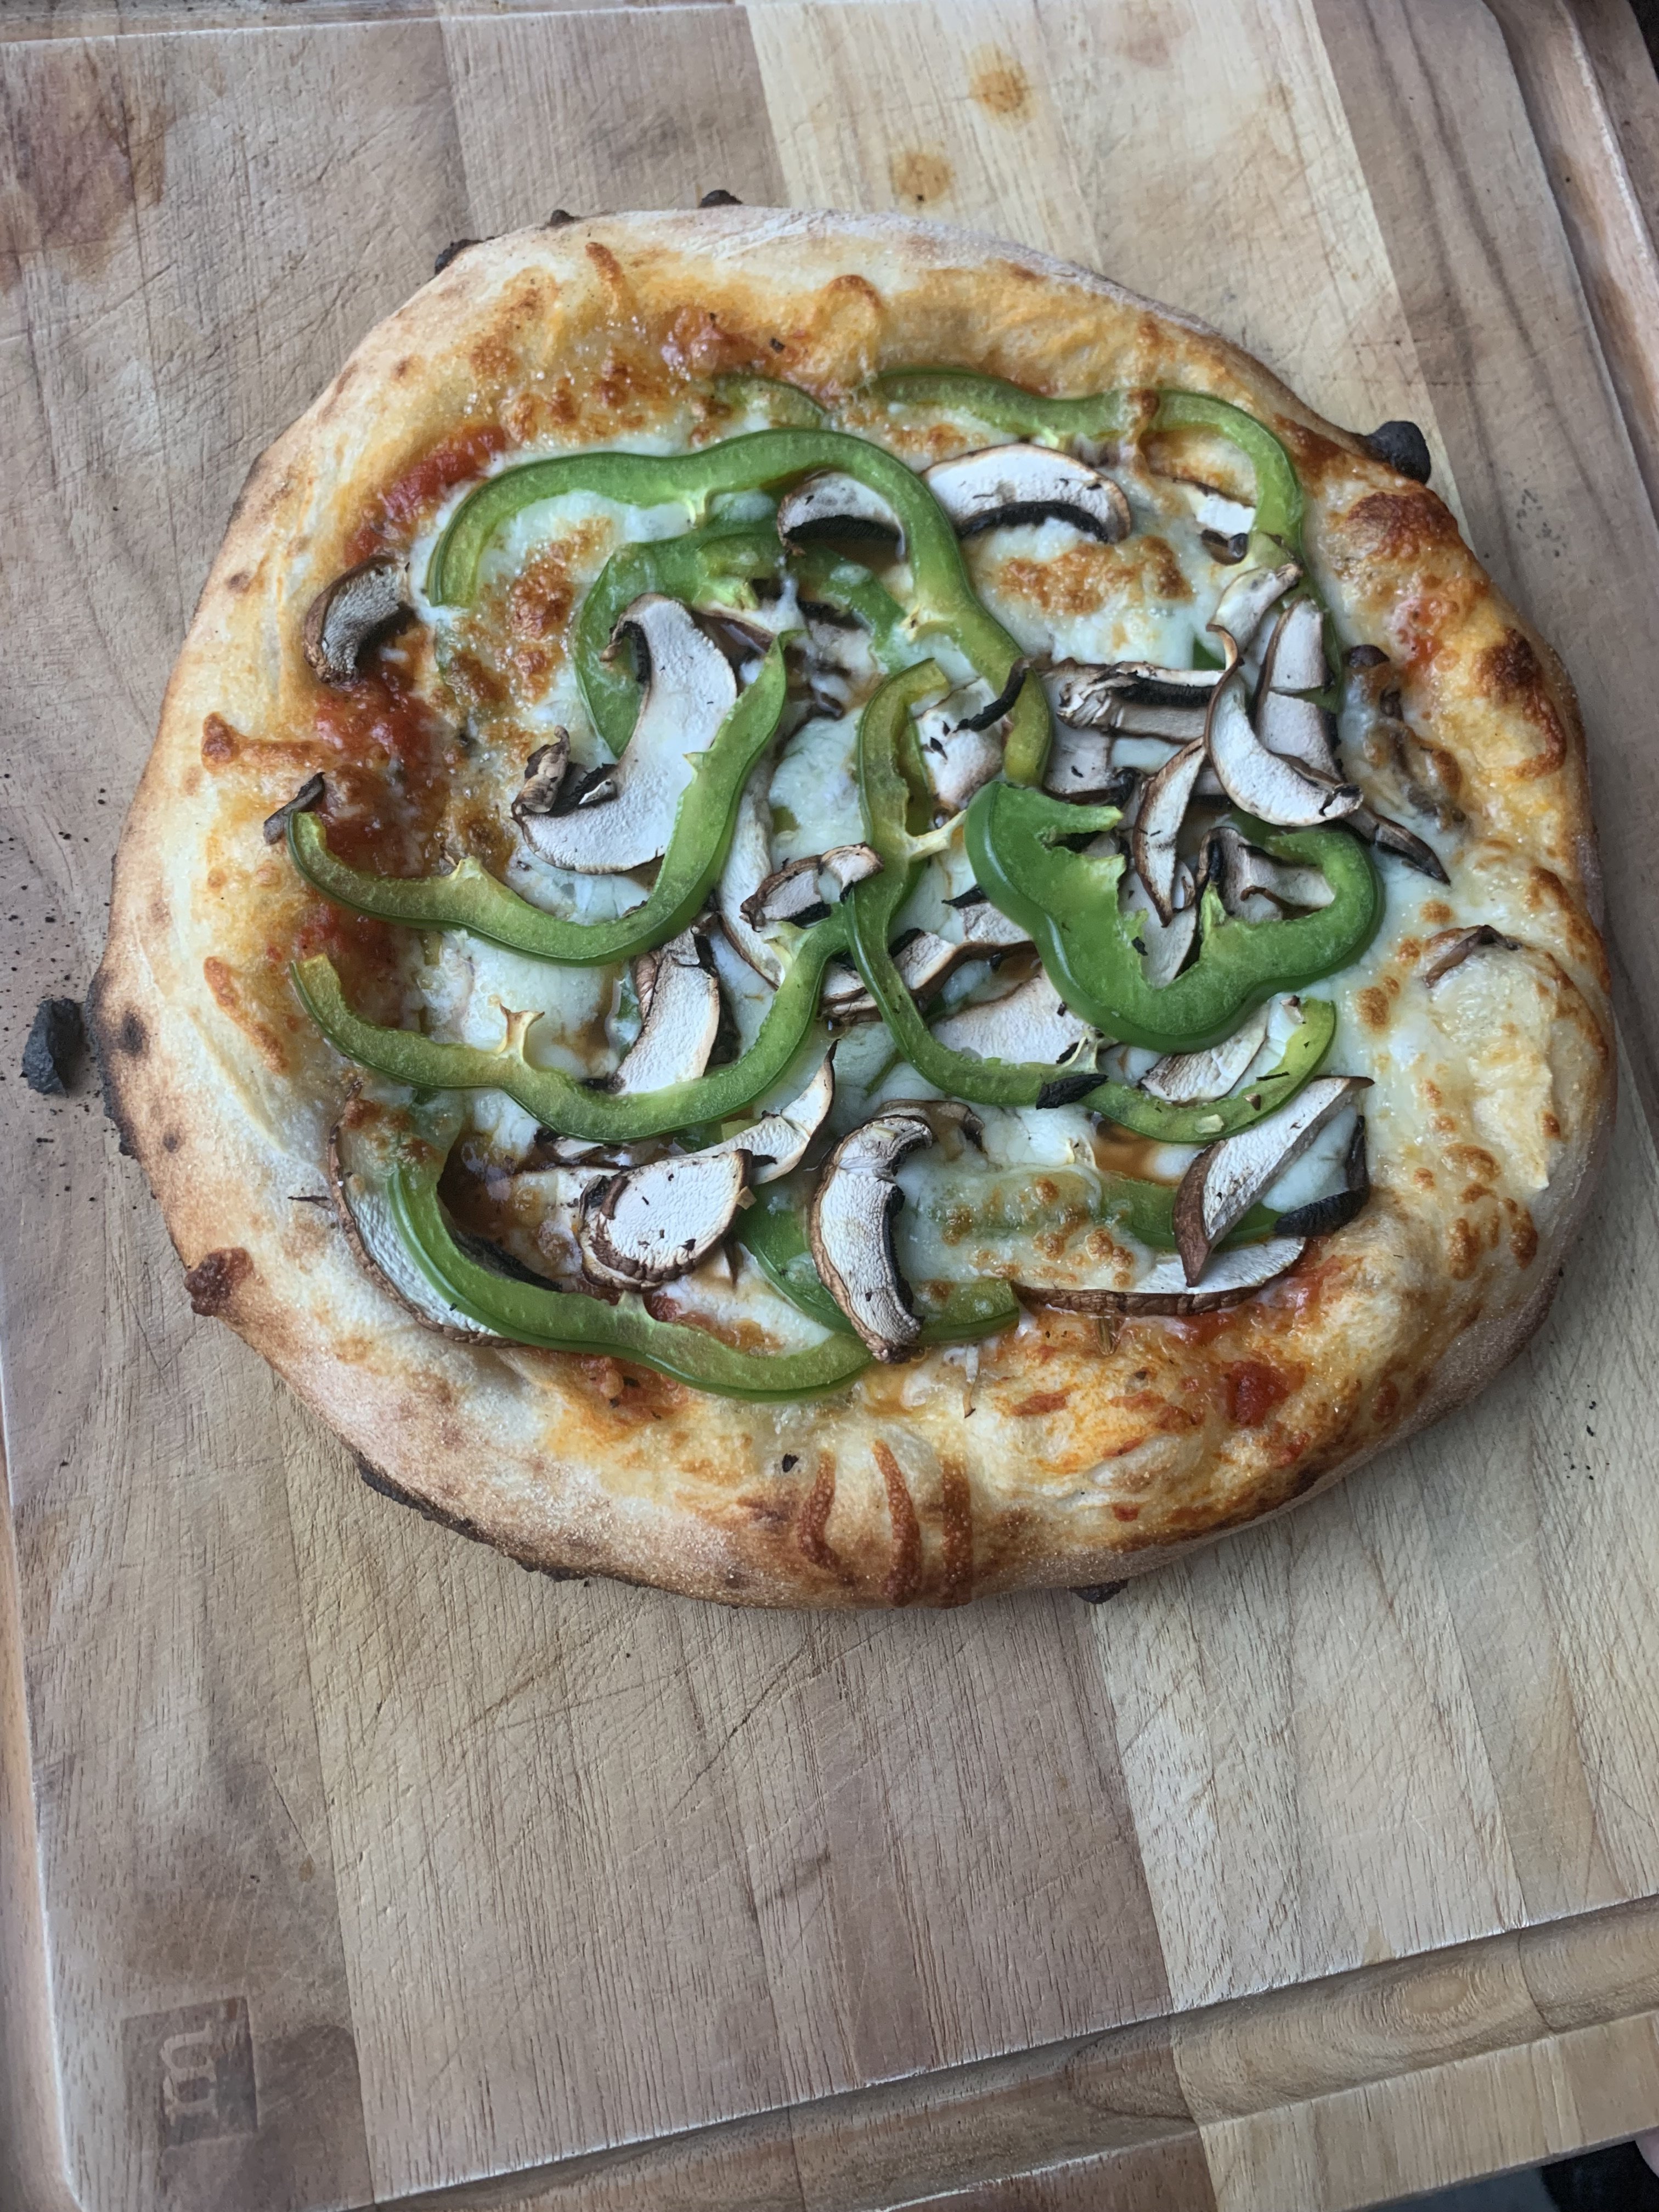 Homemade pizza, lots of green pepper and mushrooms visible,  'leopard spotting' on the crust    IT WAS DELICIOUS.